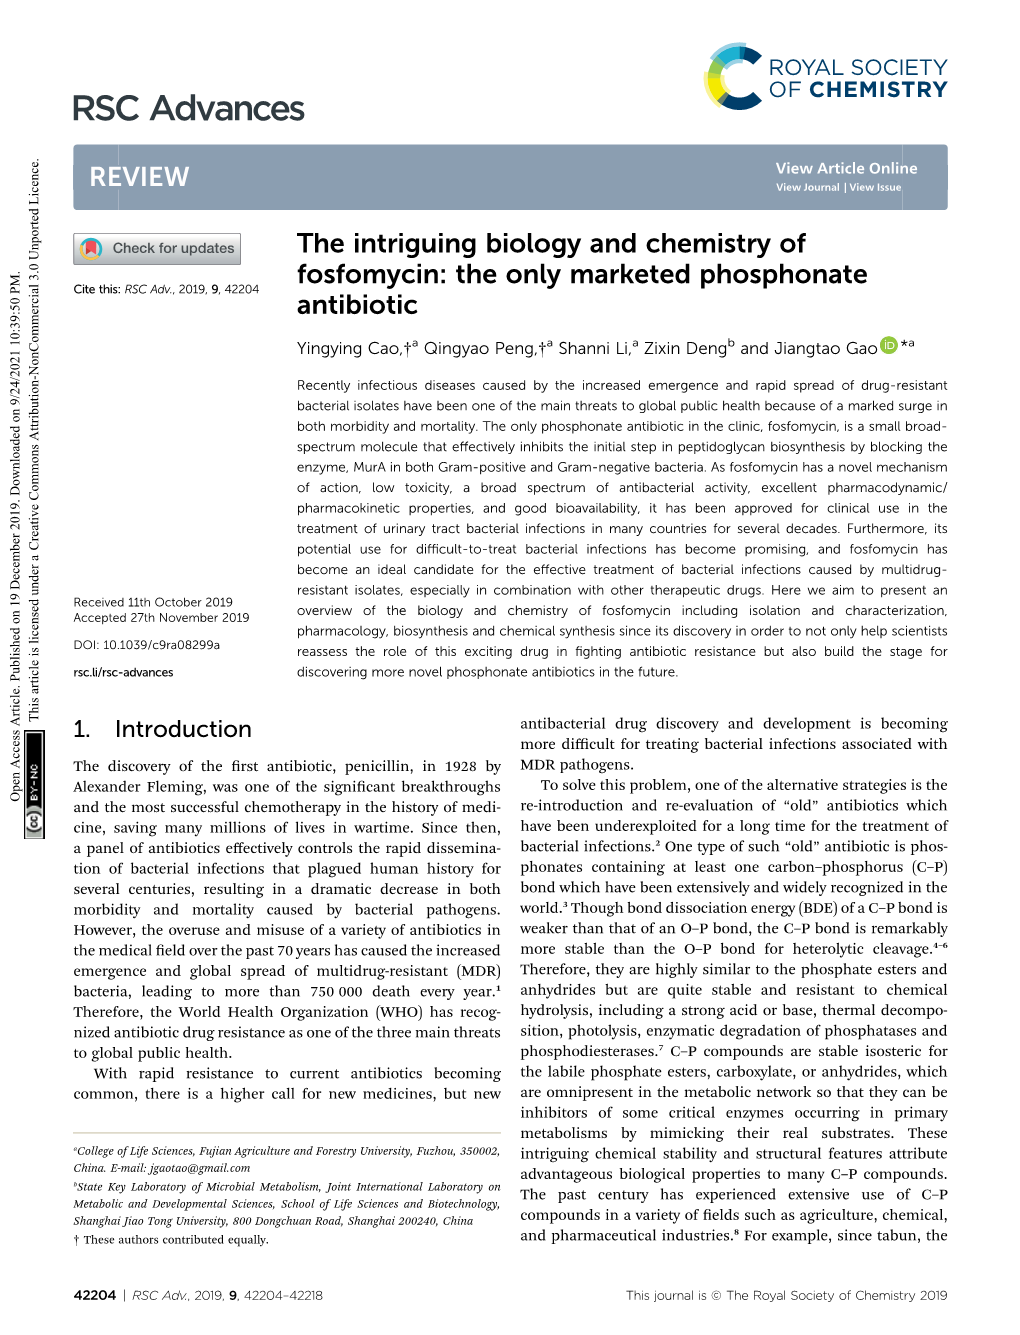 The Intriguing Biology and Chemistry of Fosfomycin: the Only Marketed Phosphonate Antibiotic